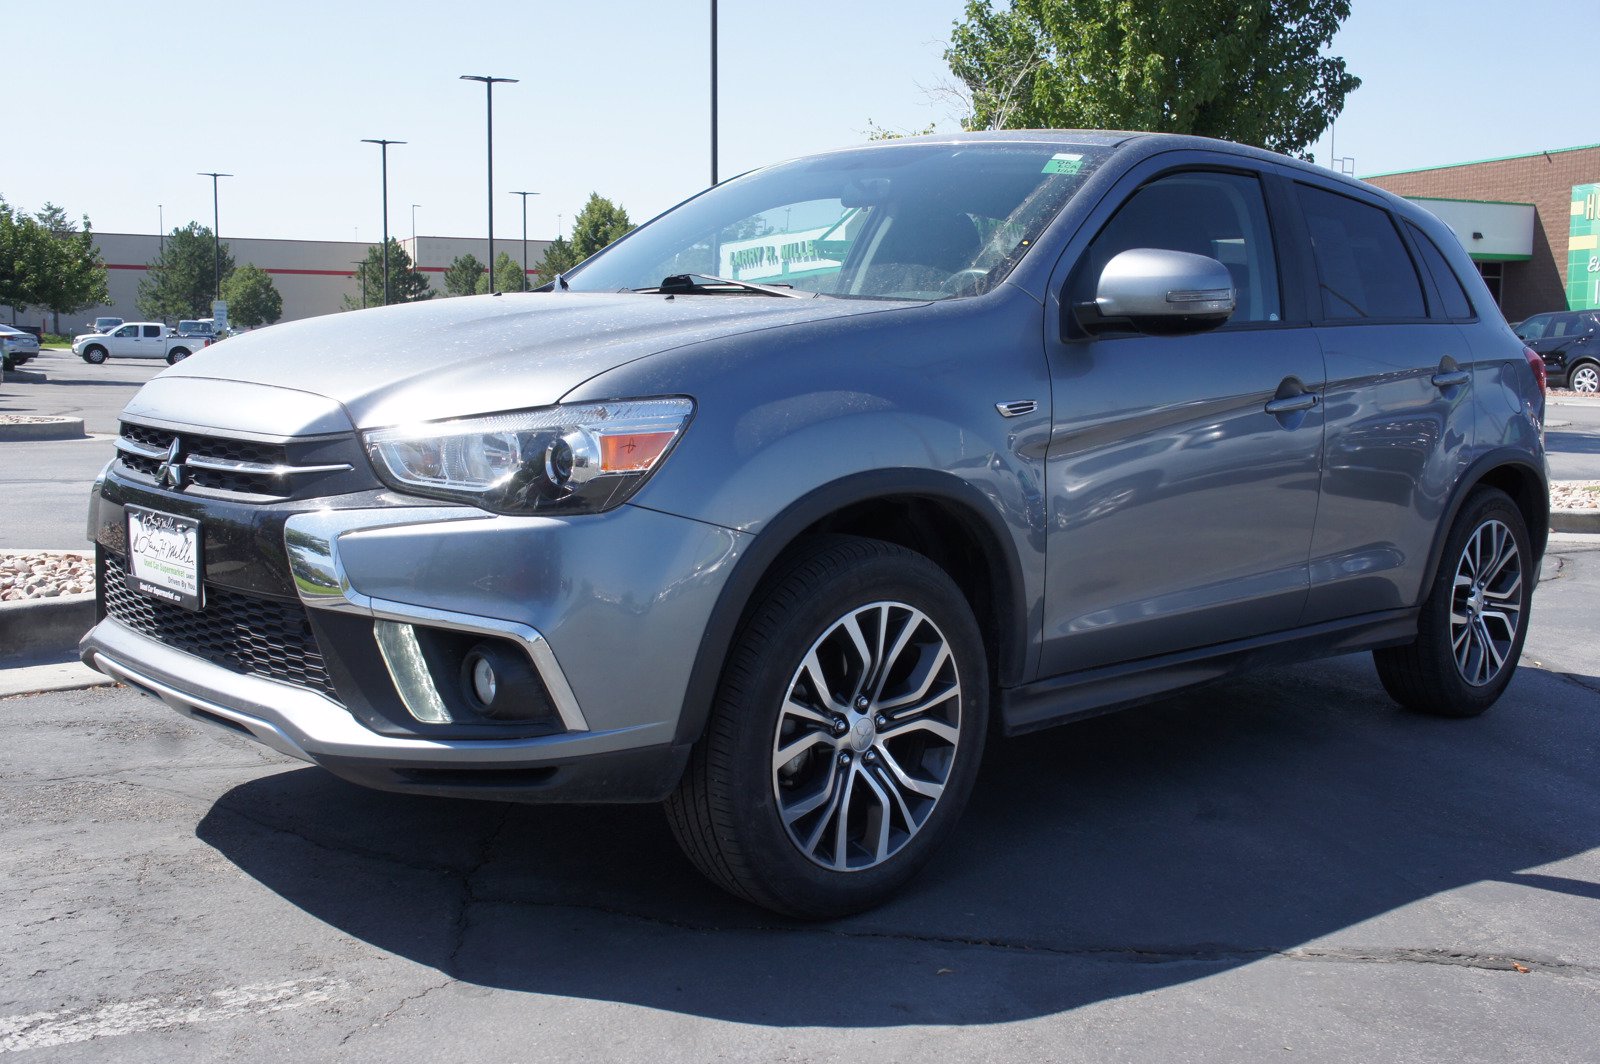 PreOwned 2019 Mitsubishi Outlander Sport Sport Utility in